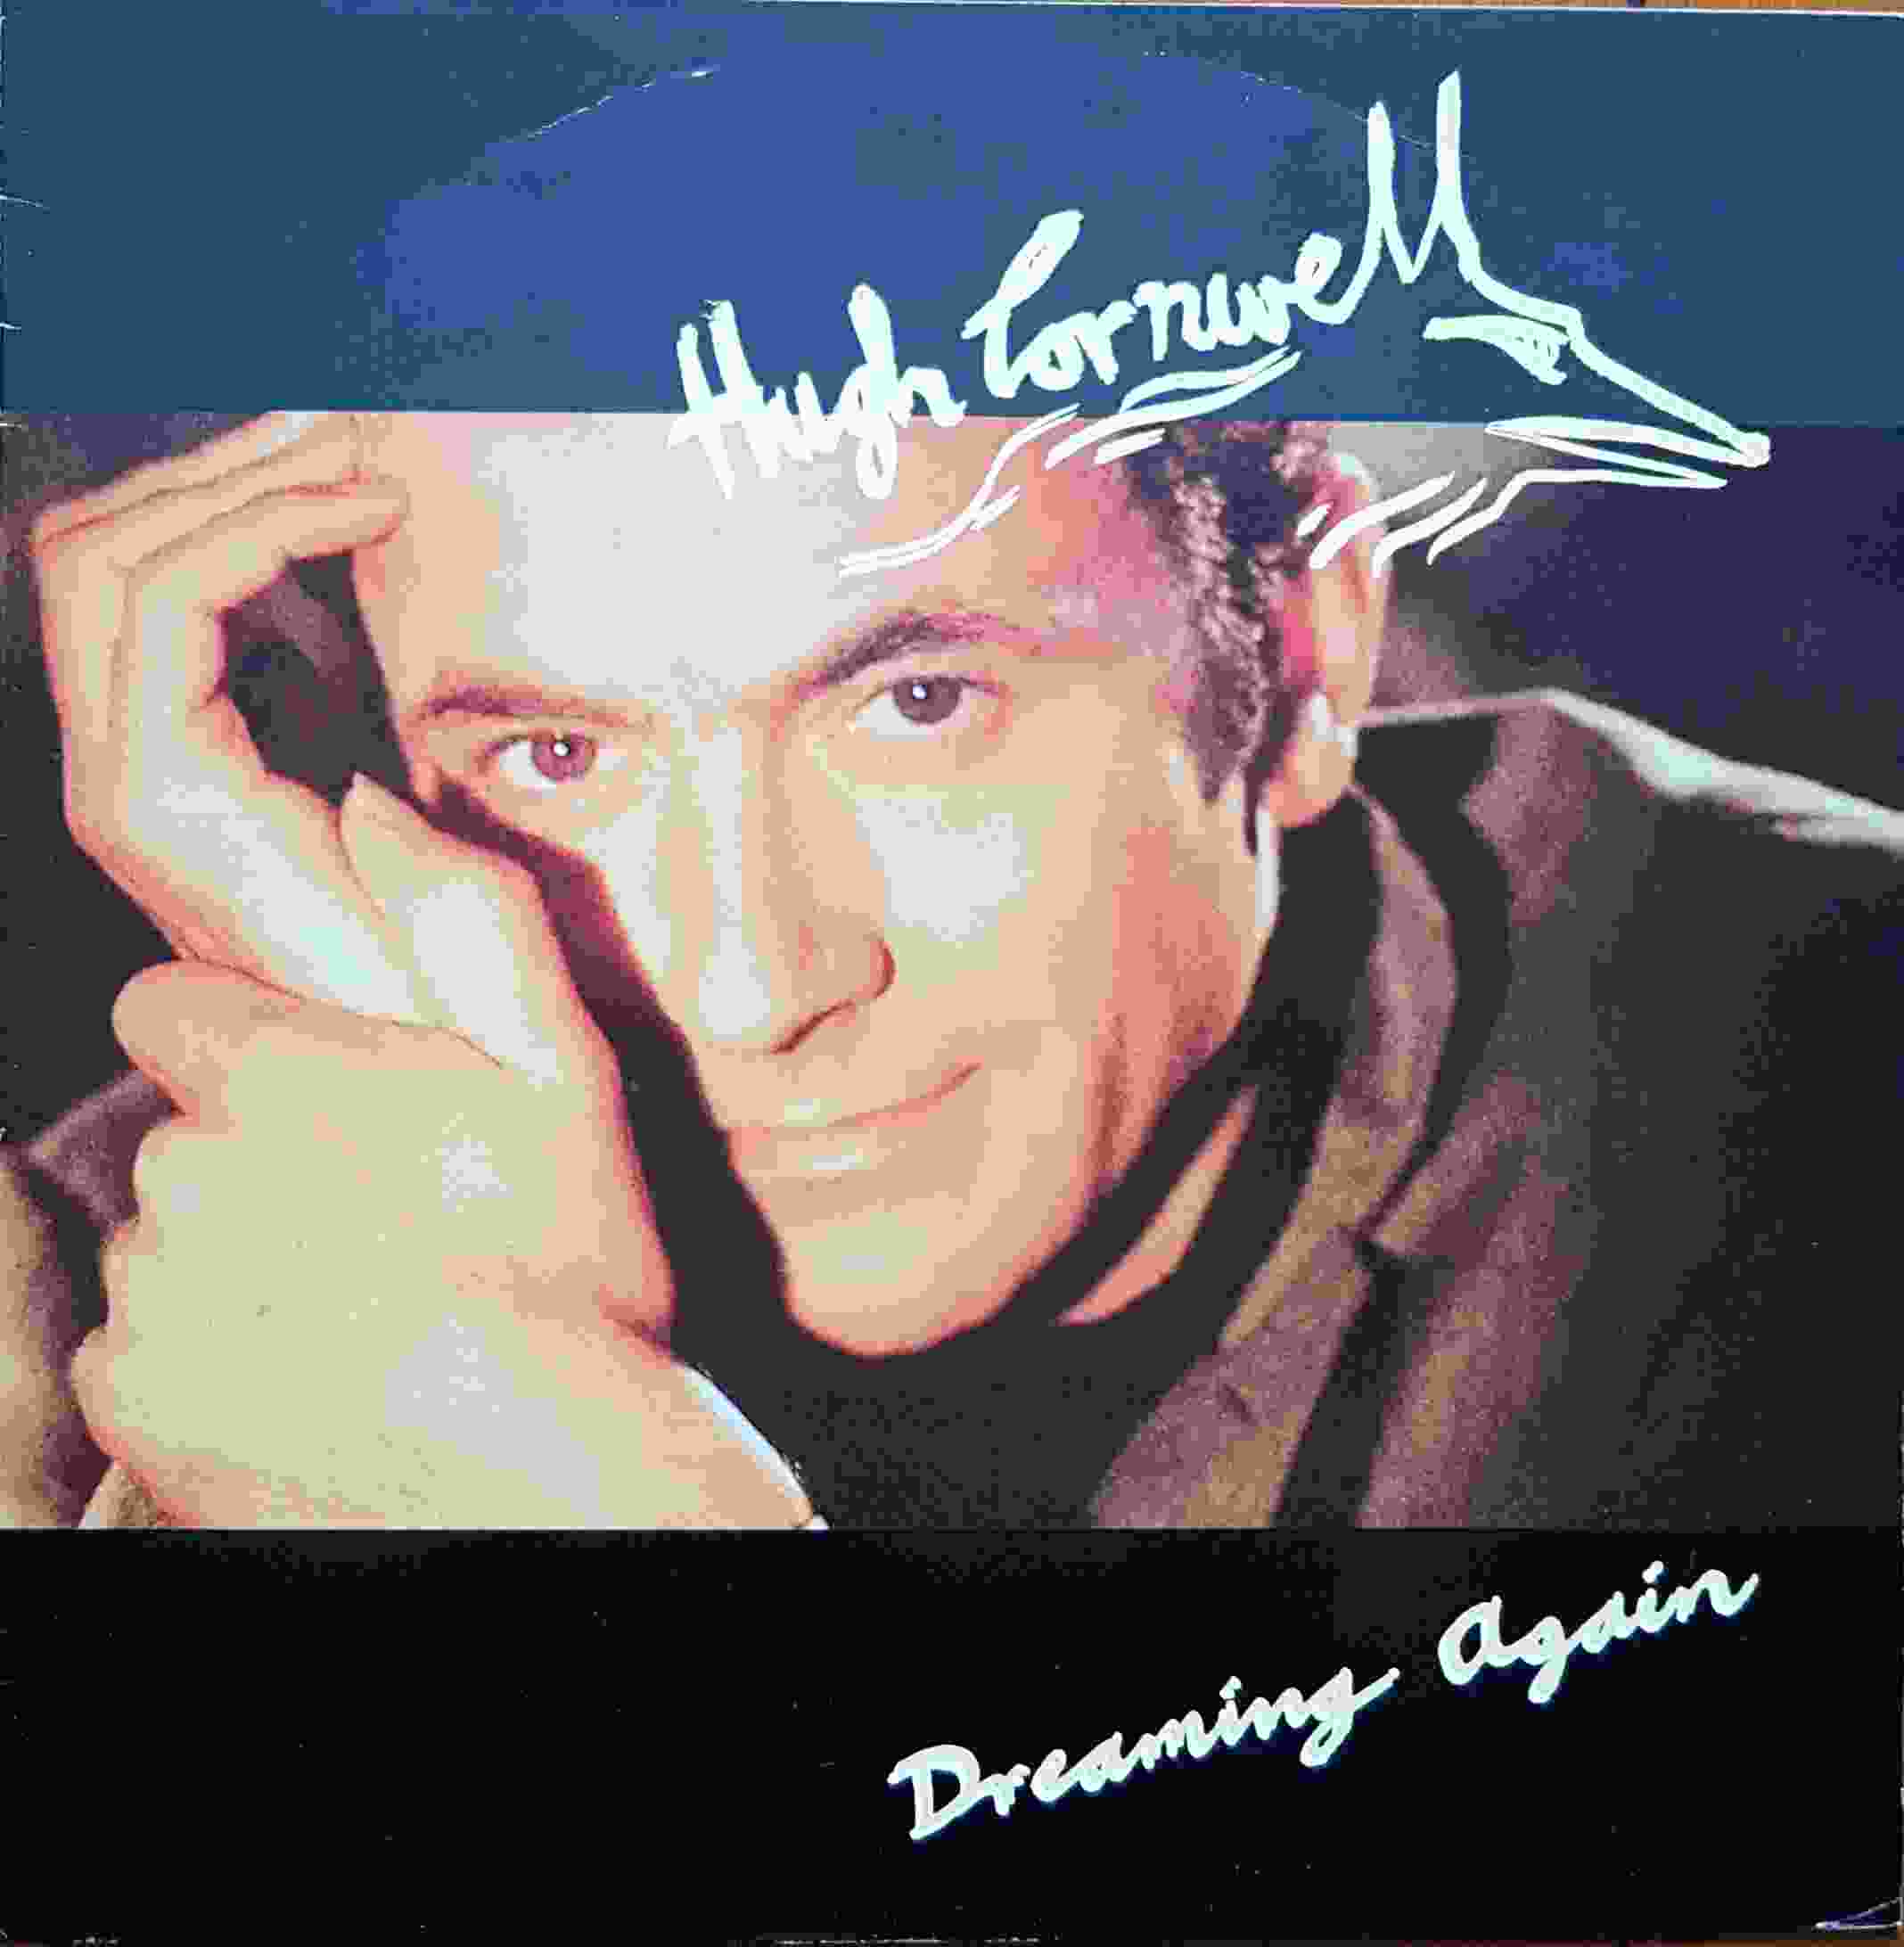 Picture of VST 1093 Dreaming again by artist Hugh Cornwell  from The Stranglers